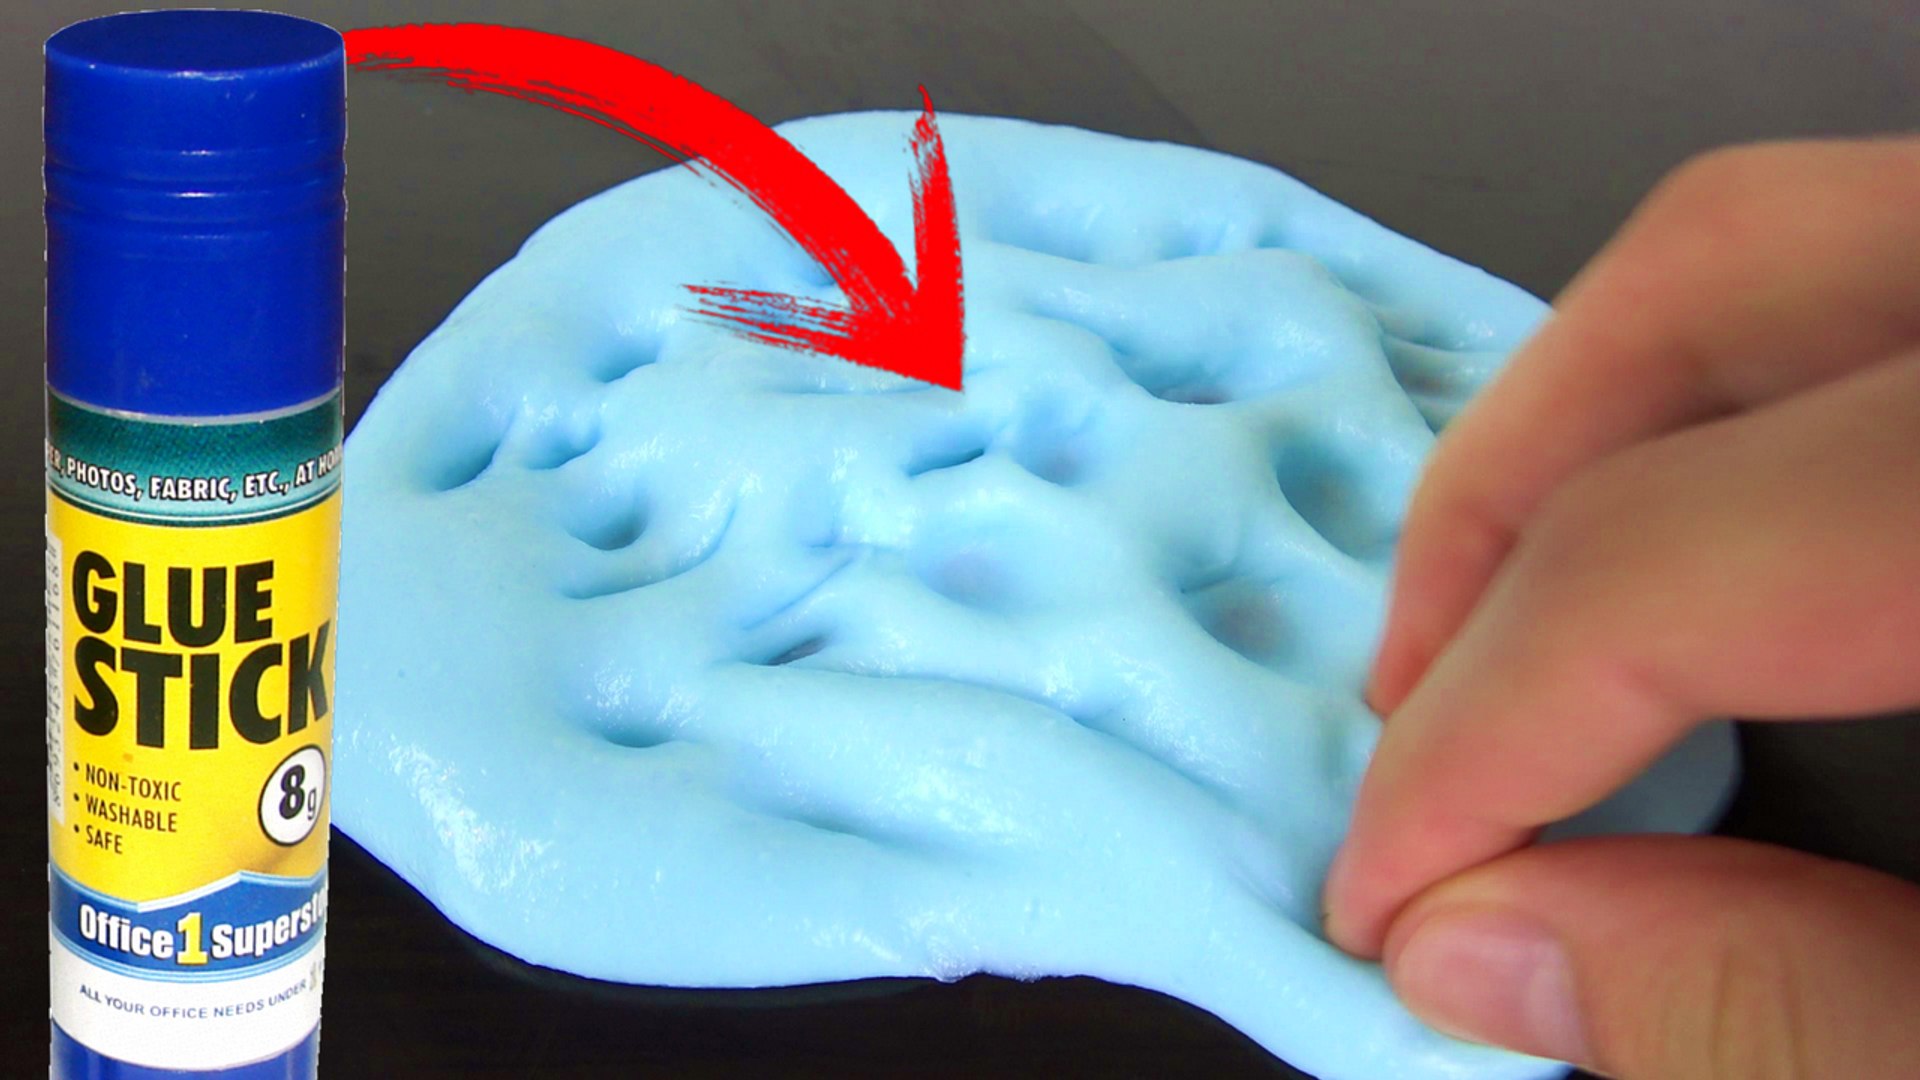 How To Make Best Slime With Glue Stick - 3 DIY Glue Stick Slime easy  recipes – Видео Dailymotion